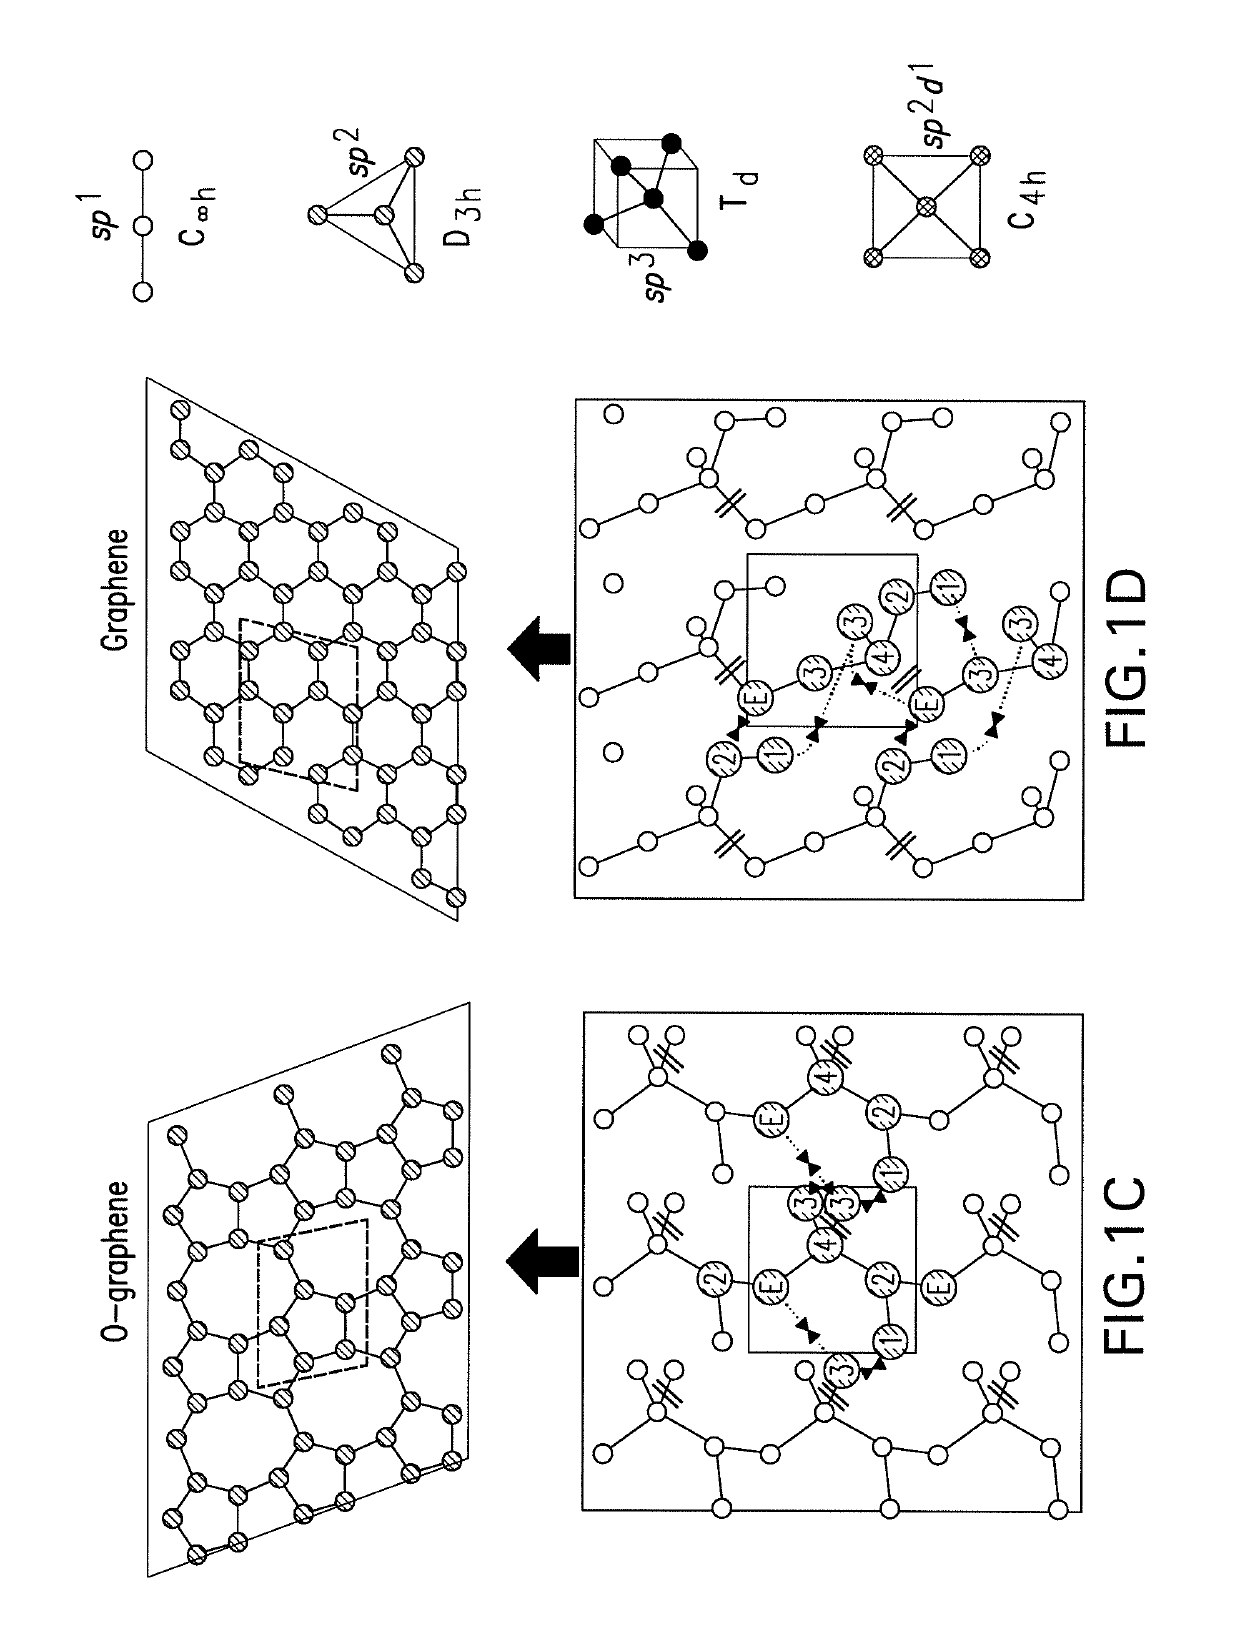 Recipe for the synthesis of metastable structures using topologically assembled precursors